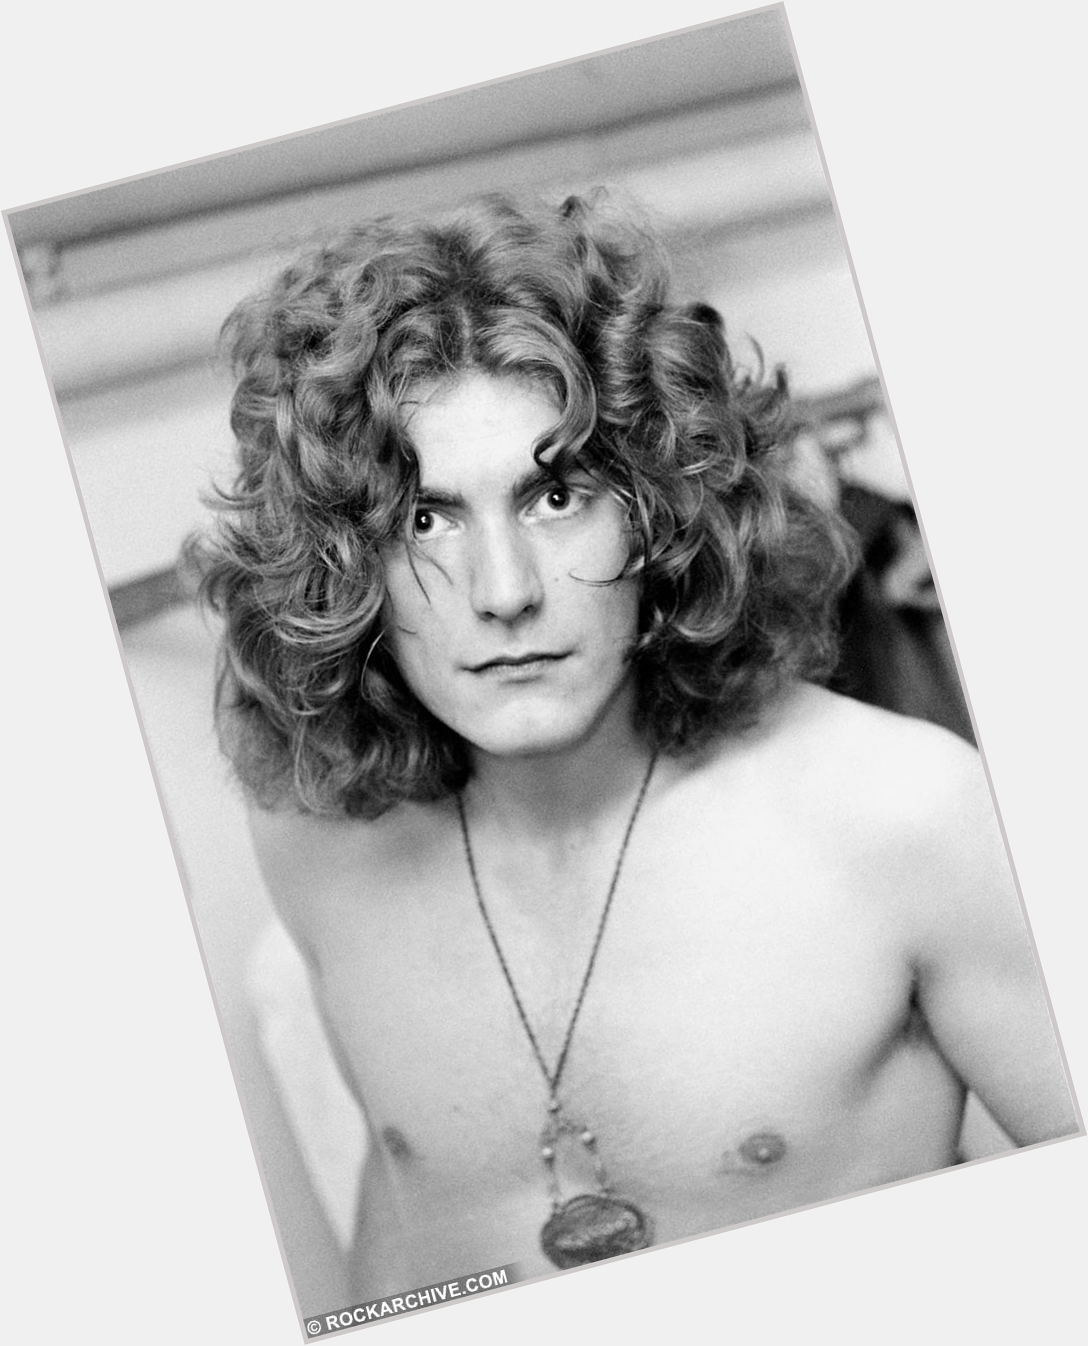 Happy 71st Birthday to the legendary Robert Plant, born this day in West Bromwich, United Kingdom. 